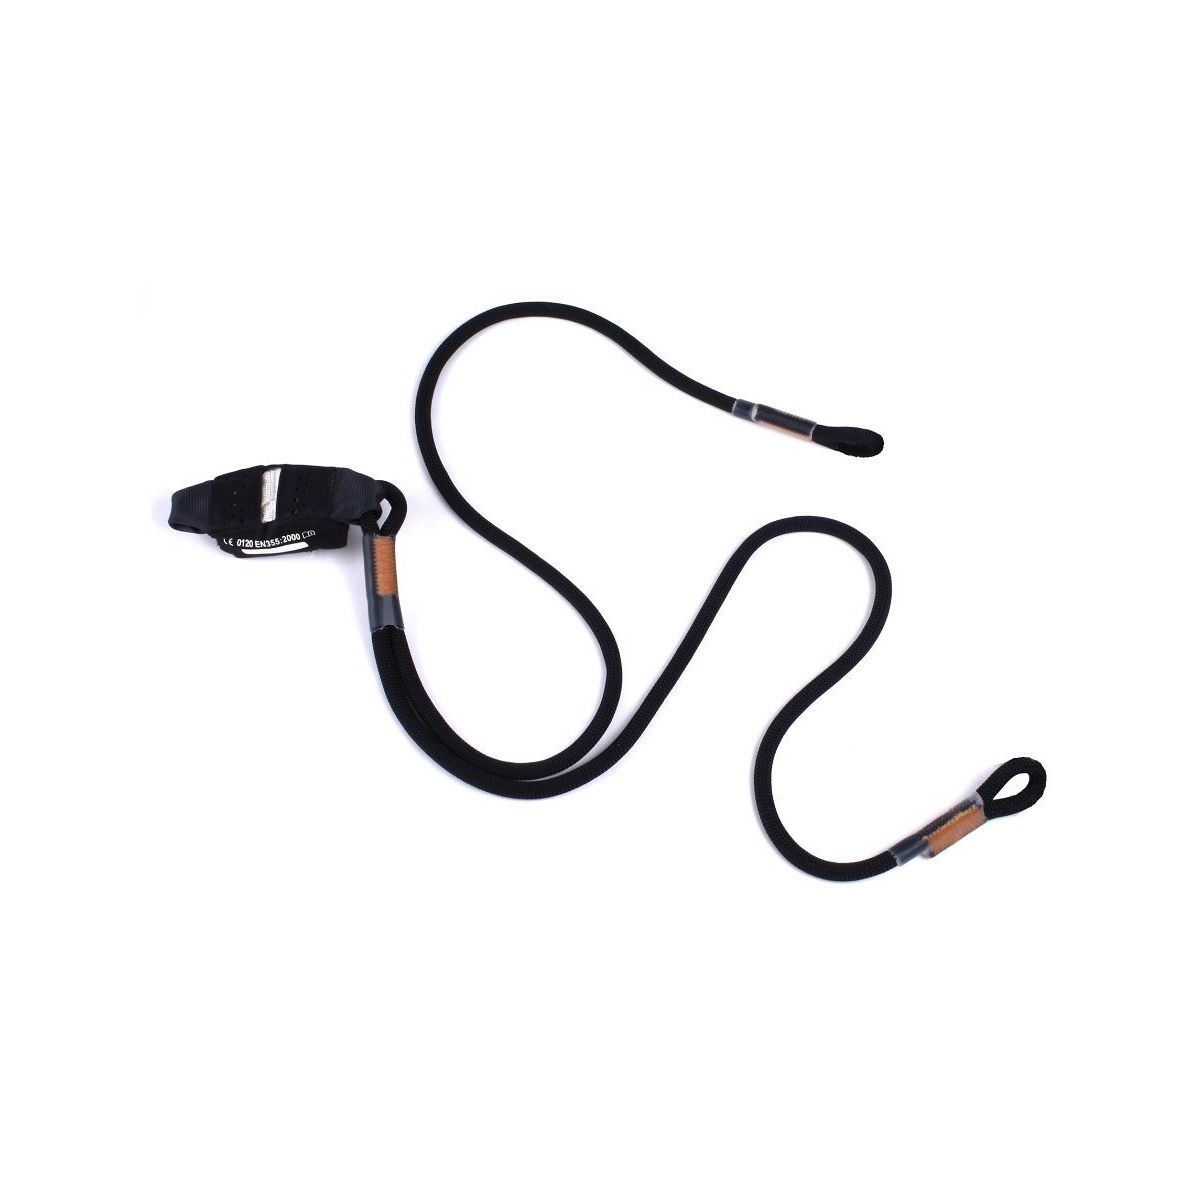 Edelweiss Absorb V 130cm lanyard wO3 connection